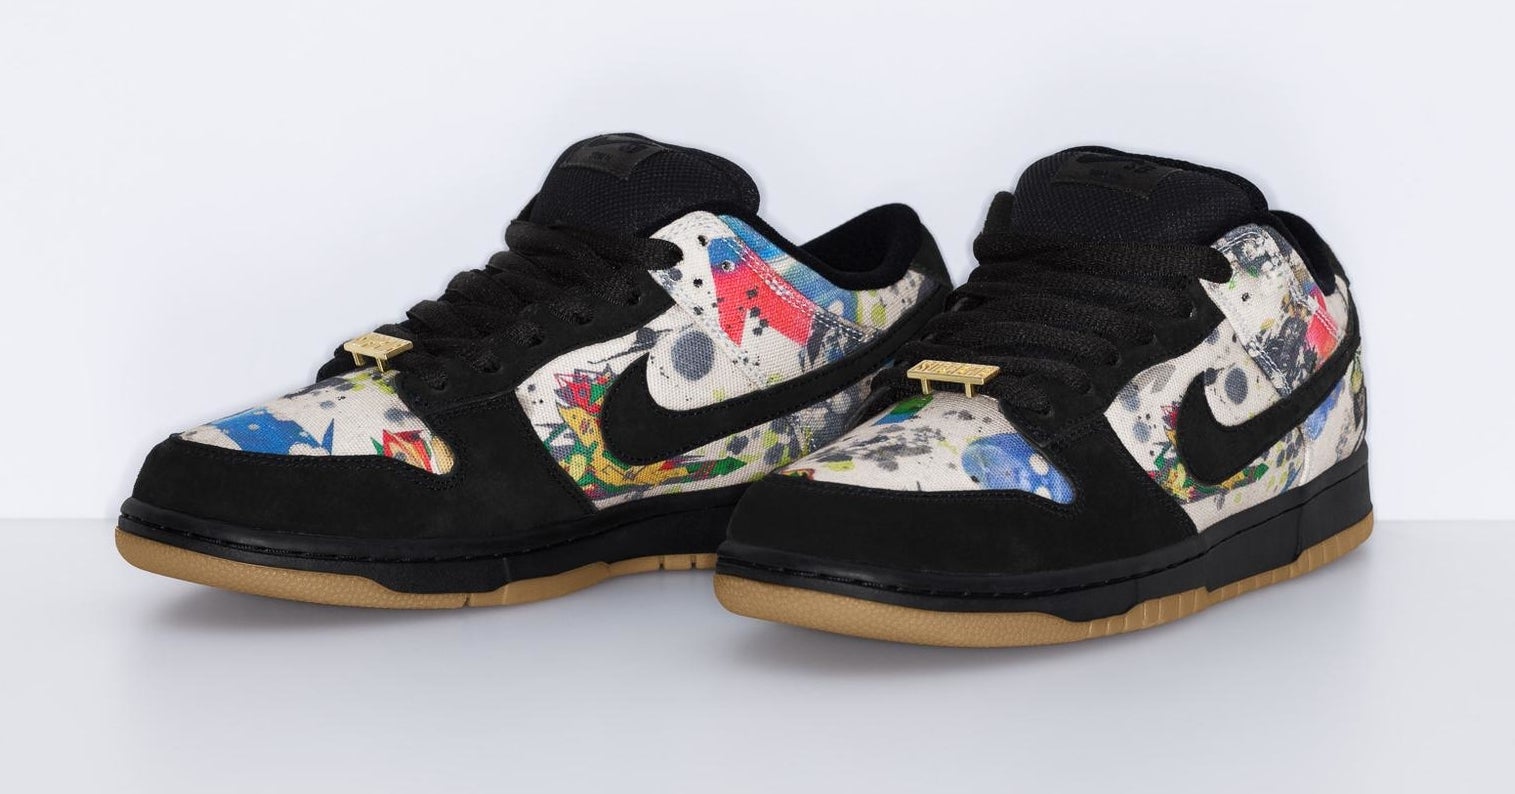 Supreme x Nike Dunk SB “Rammellzee” First Look dropping later this